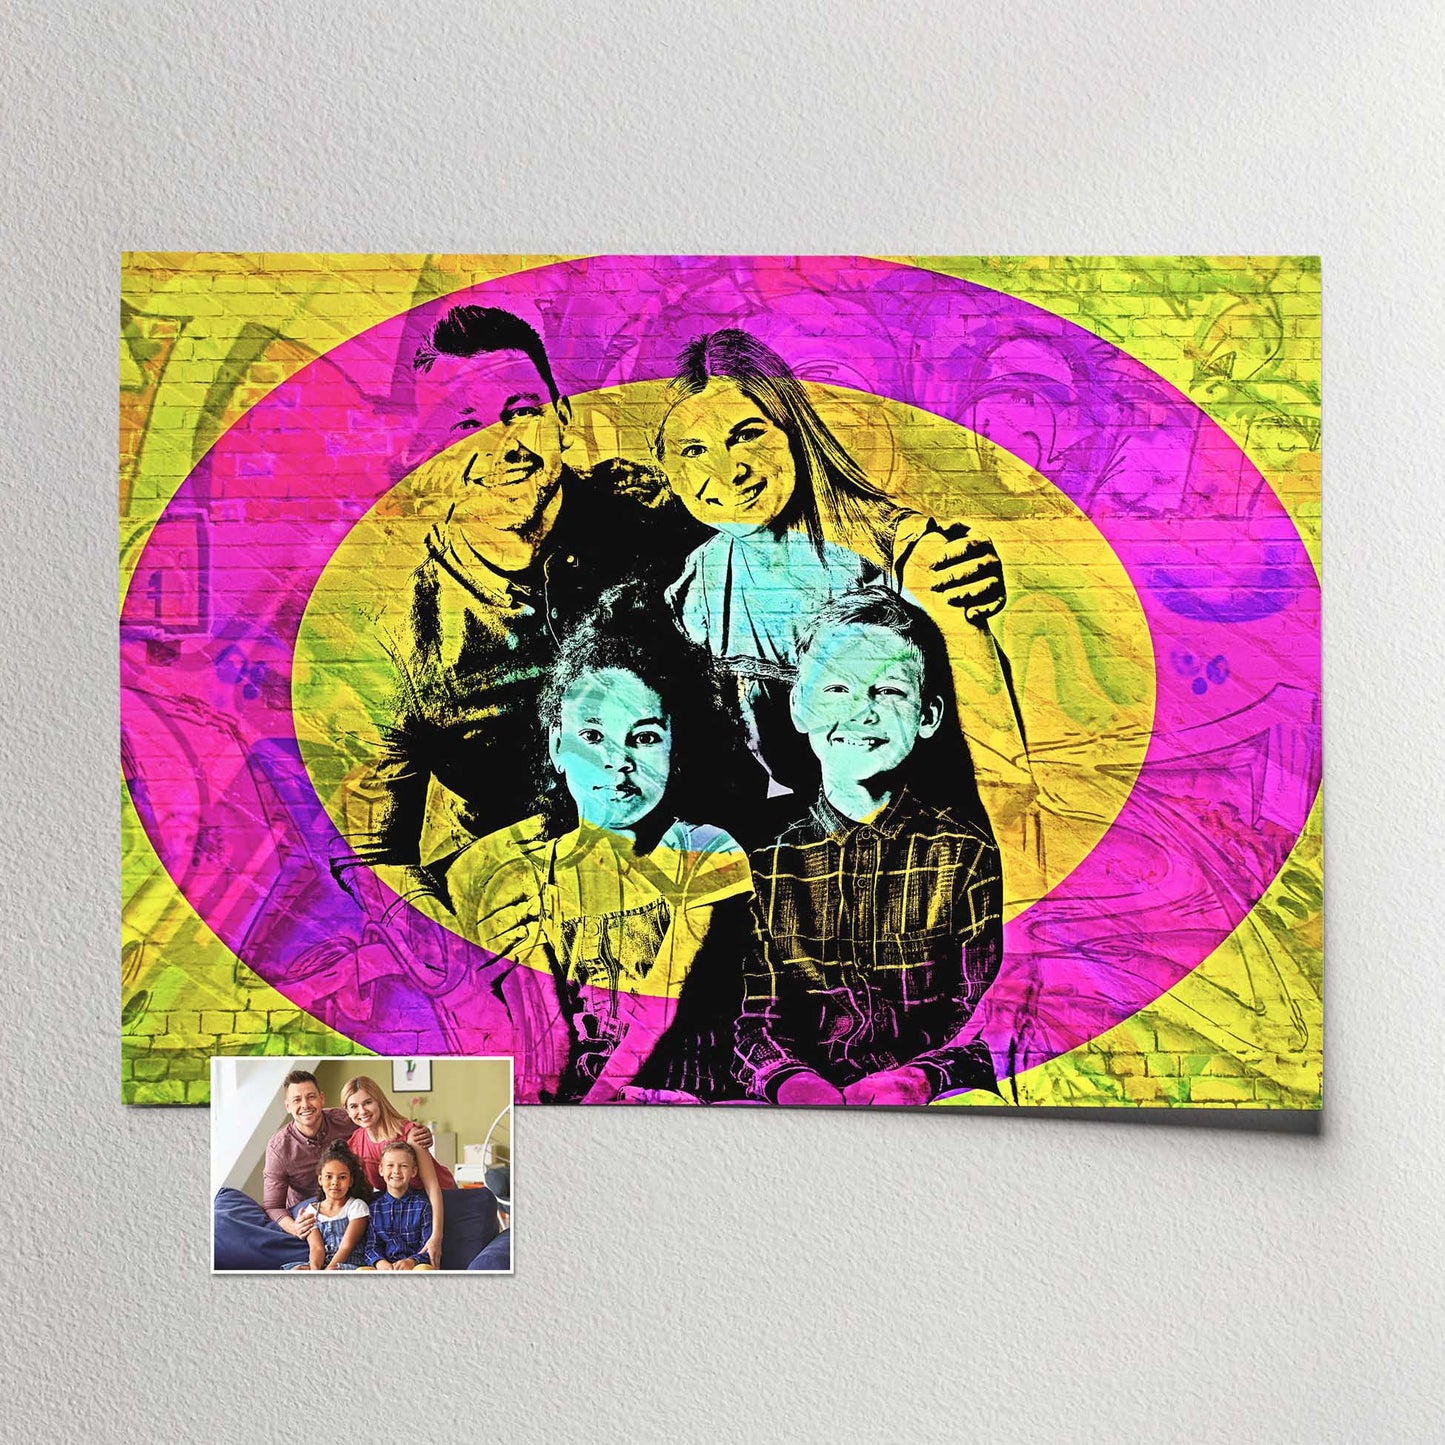 Immortalize your memories with a Personalised Graffiti Street Art Print. Featuring a graffiti street art filter and a real brick effect, this unique wall art showcases vibrant yellow, pink, and blue hues, authentic and bold design